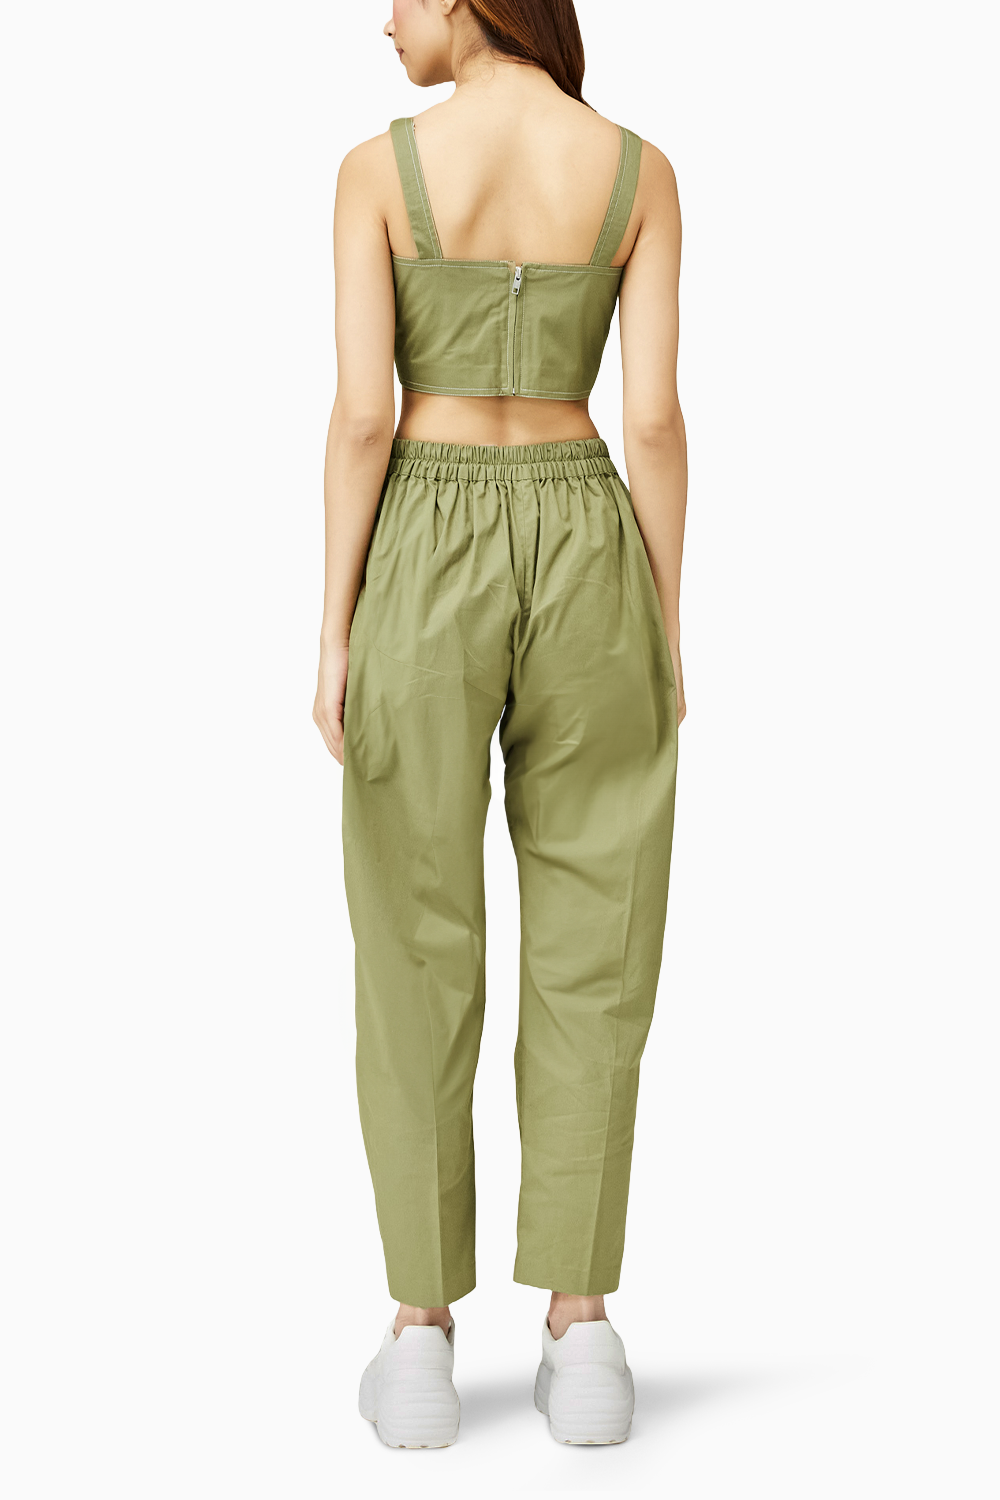 Khaki Green Bustier and Pants